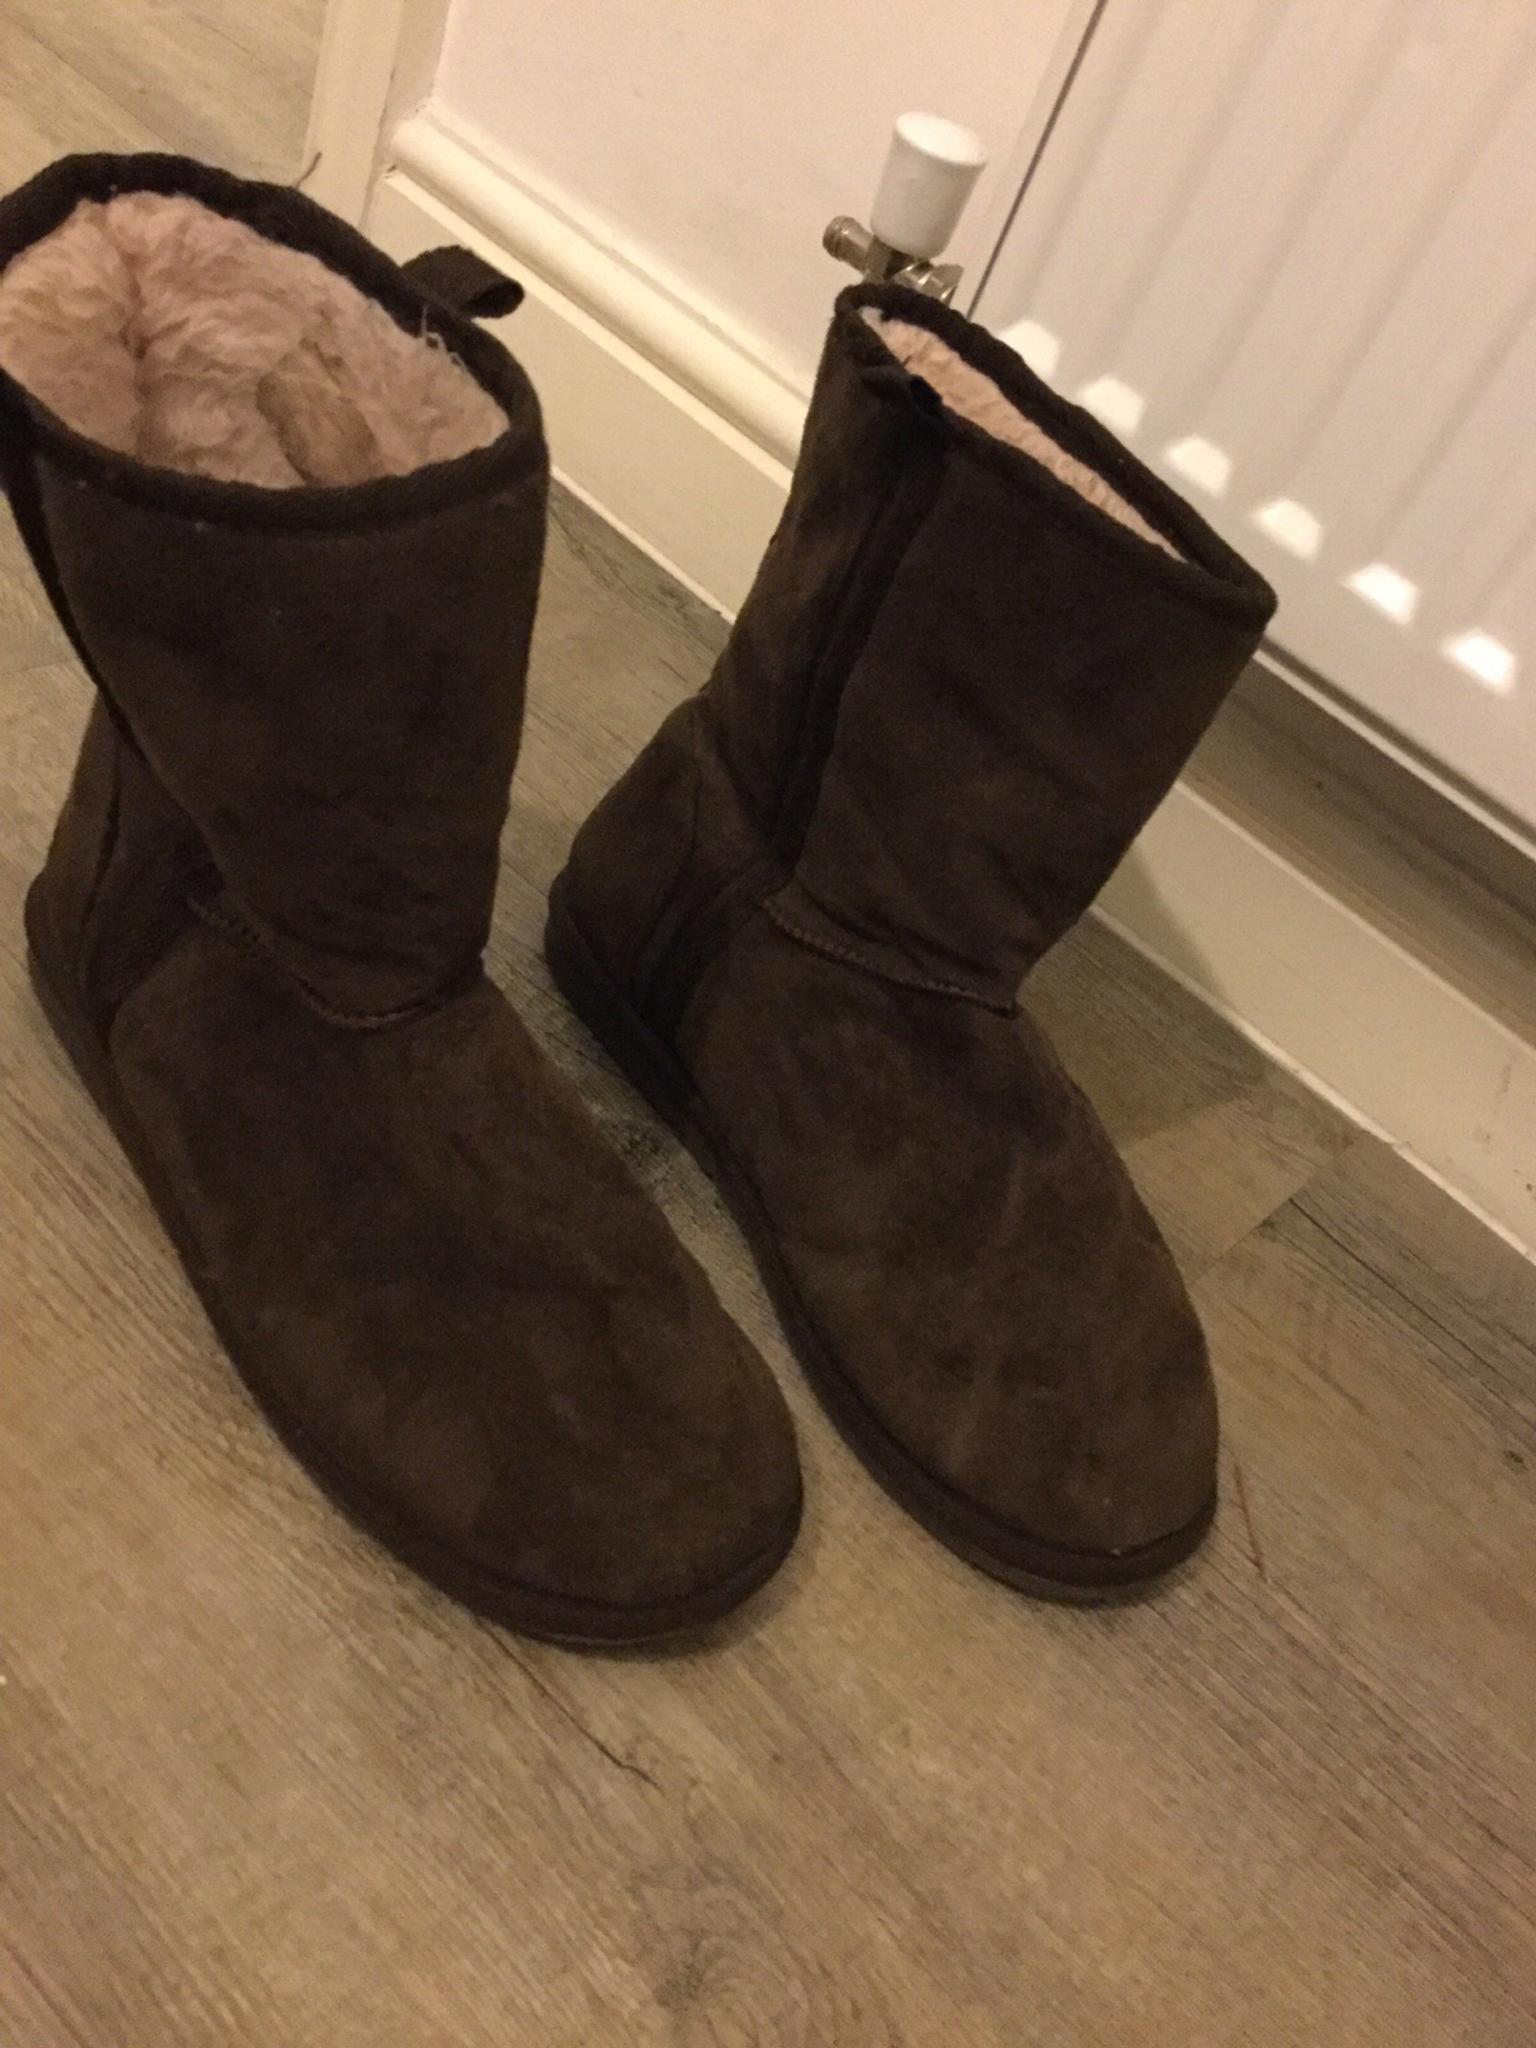 primark ugg boots Cheaper Than Retail 